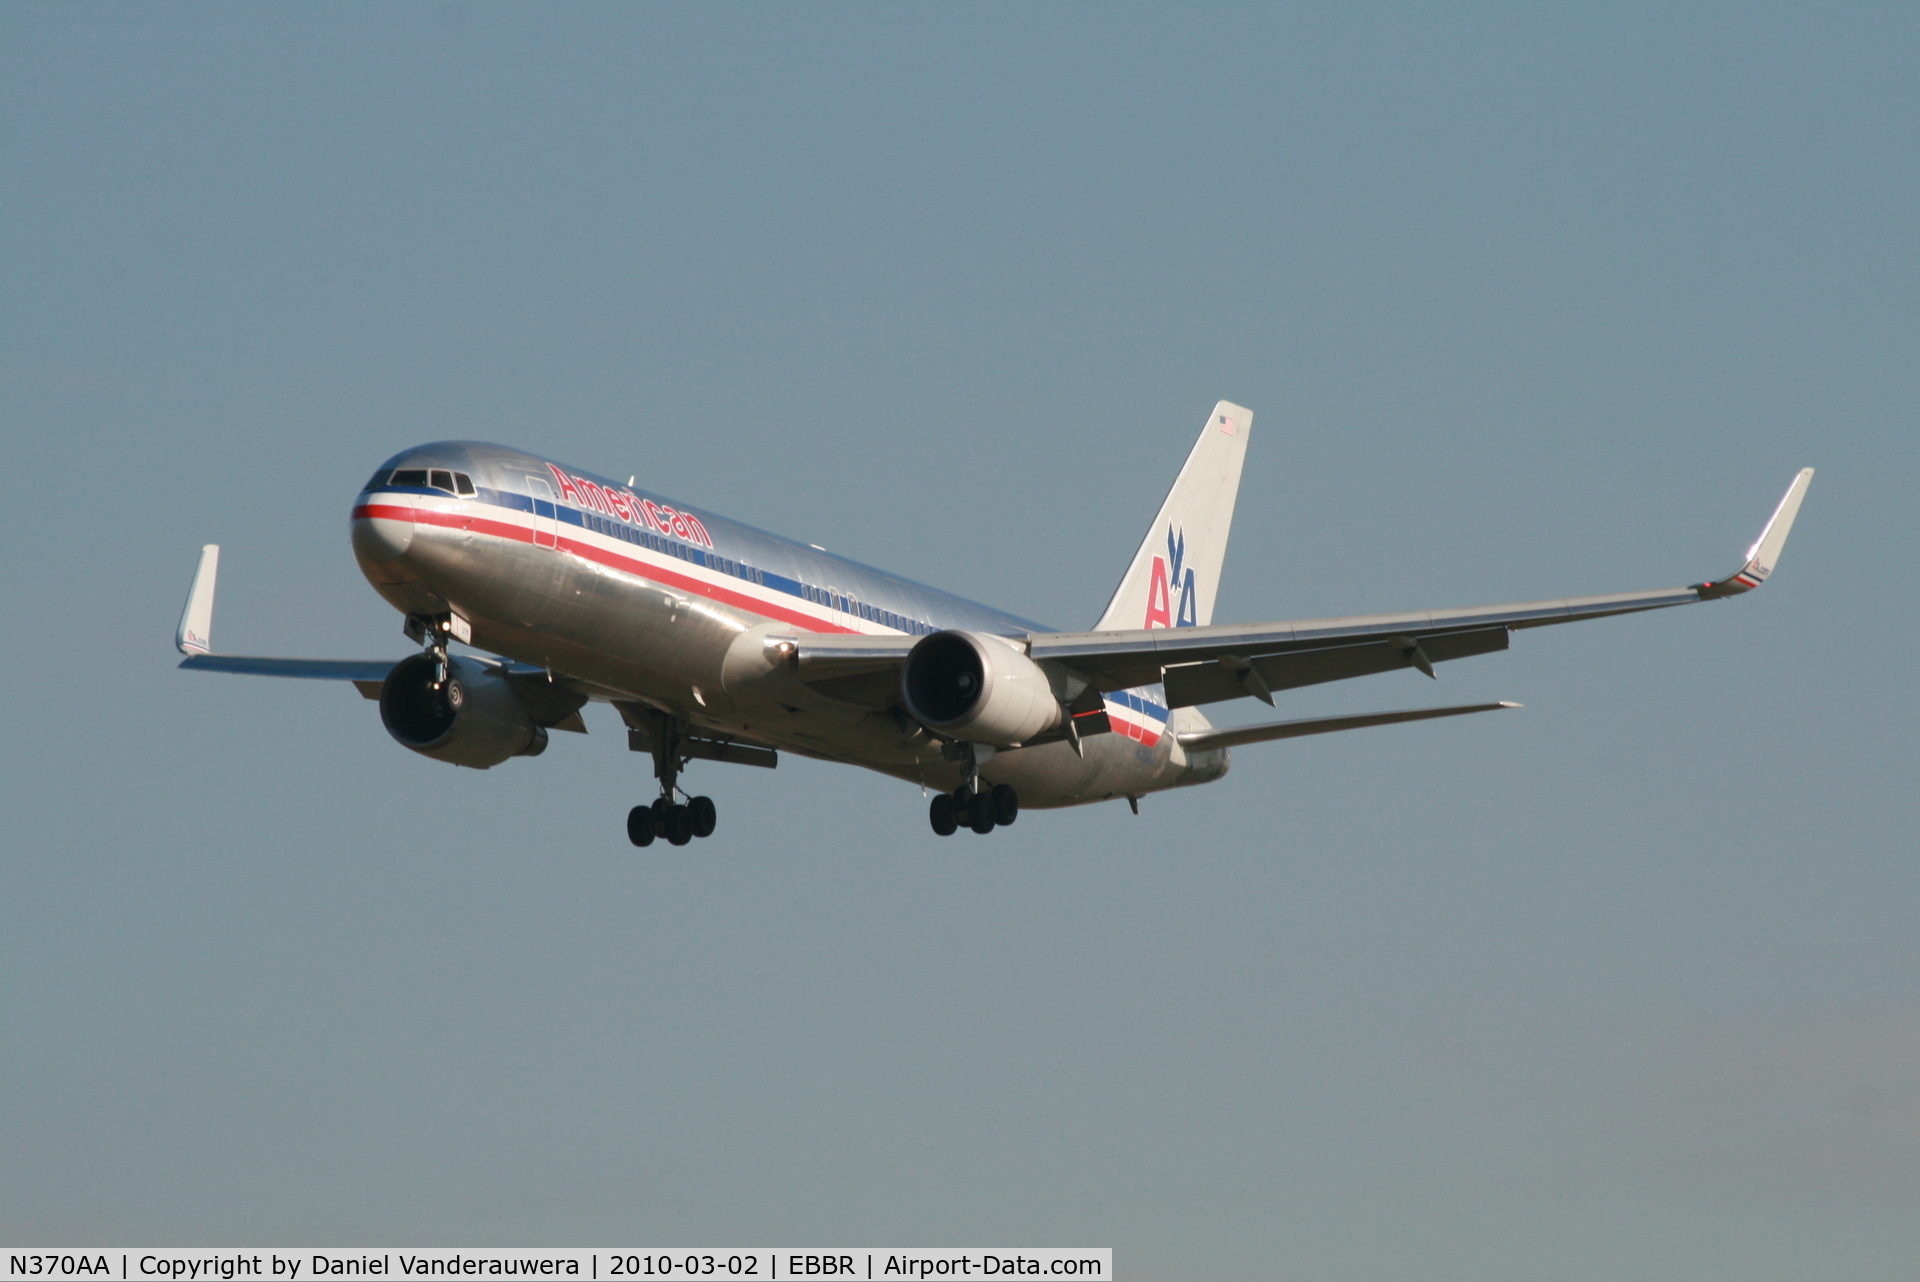 N370AA, 1992 Boeing 767-323 C/N 25197, Arrival of flight AA108 to RWY 25L - now with winglets